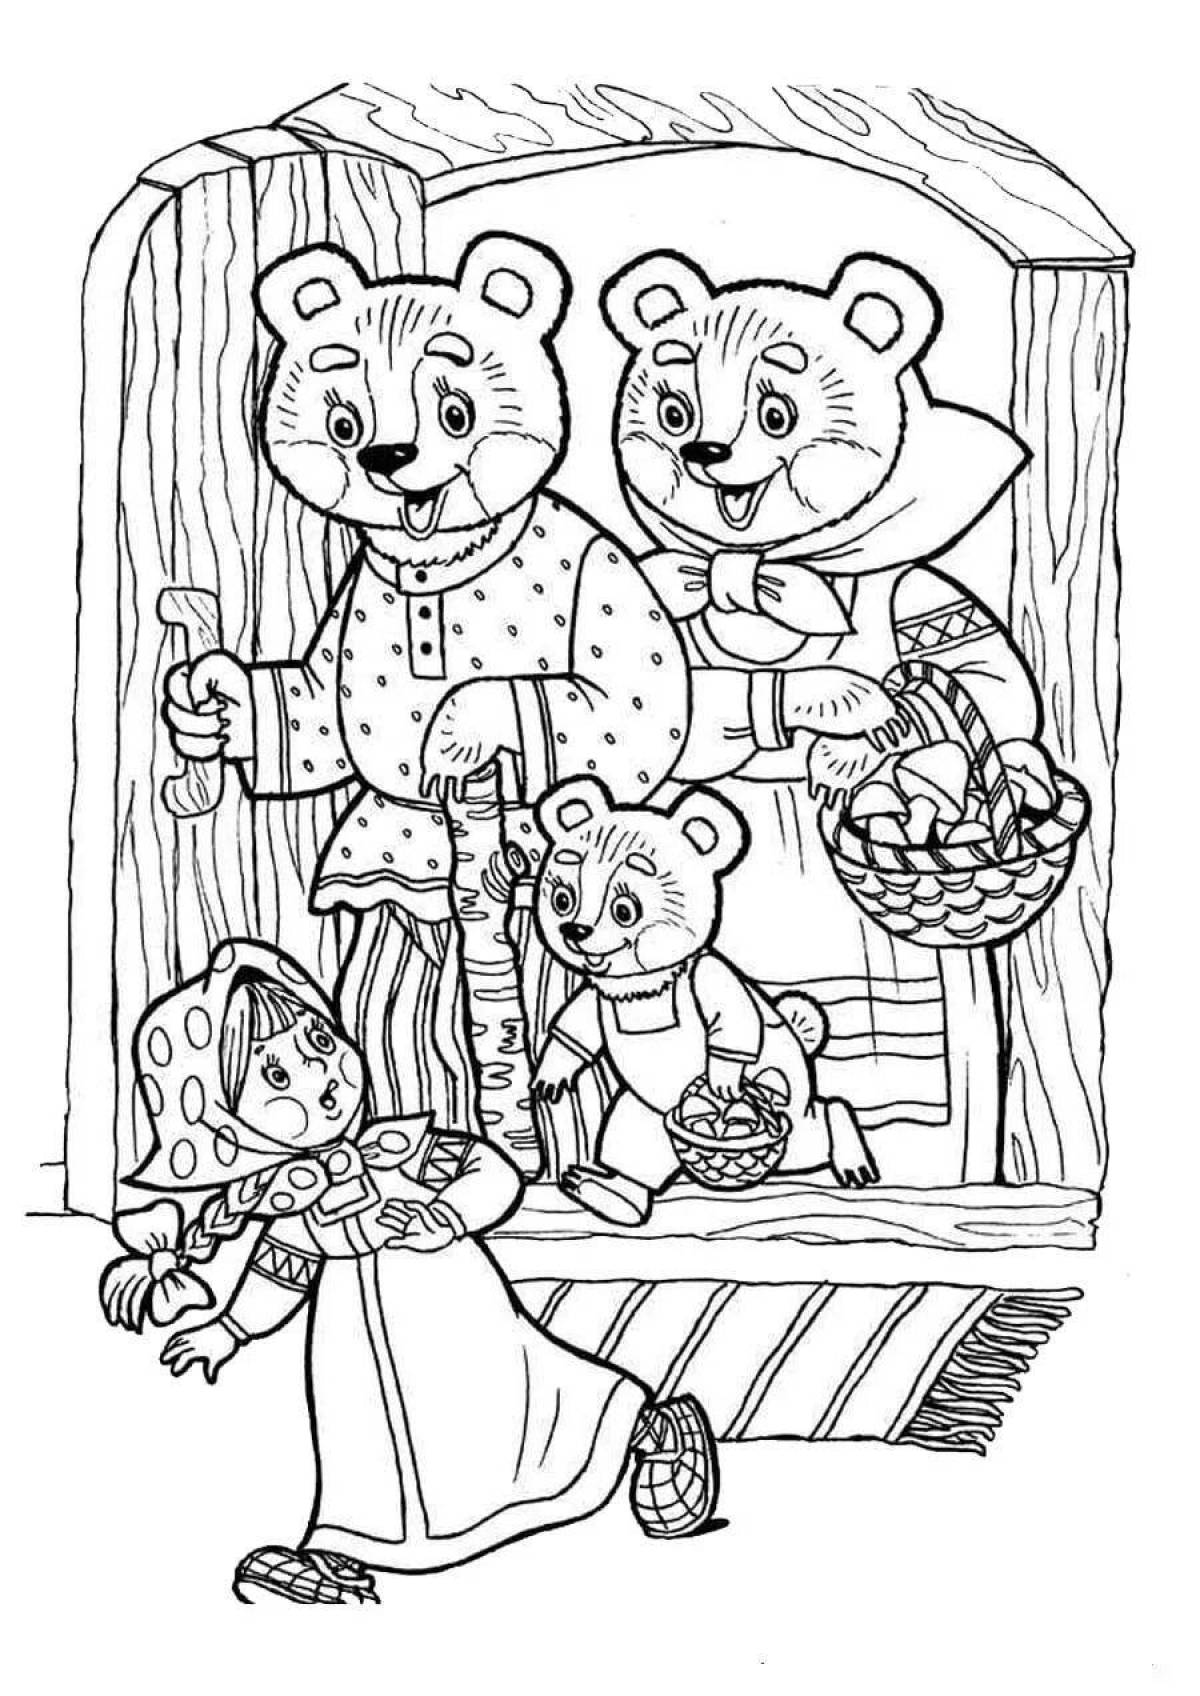 Wonderful coloring pages with 3 bears for kids